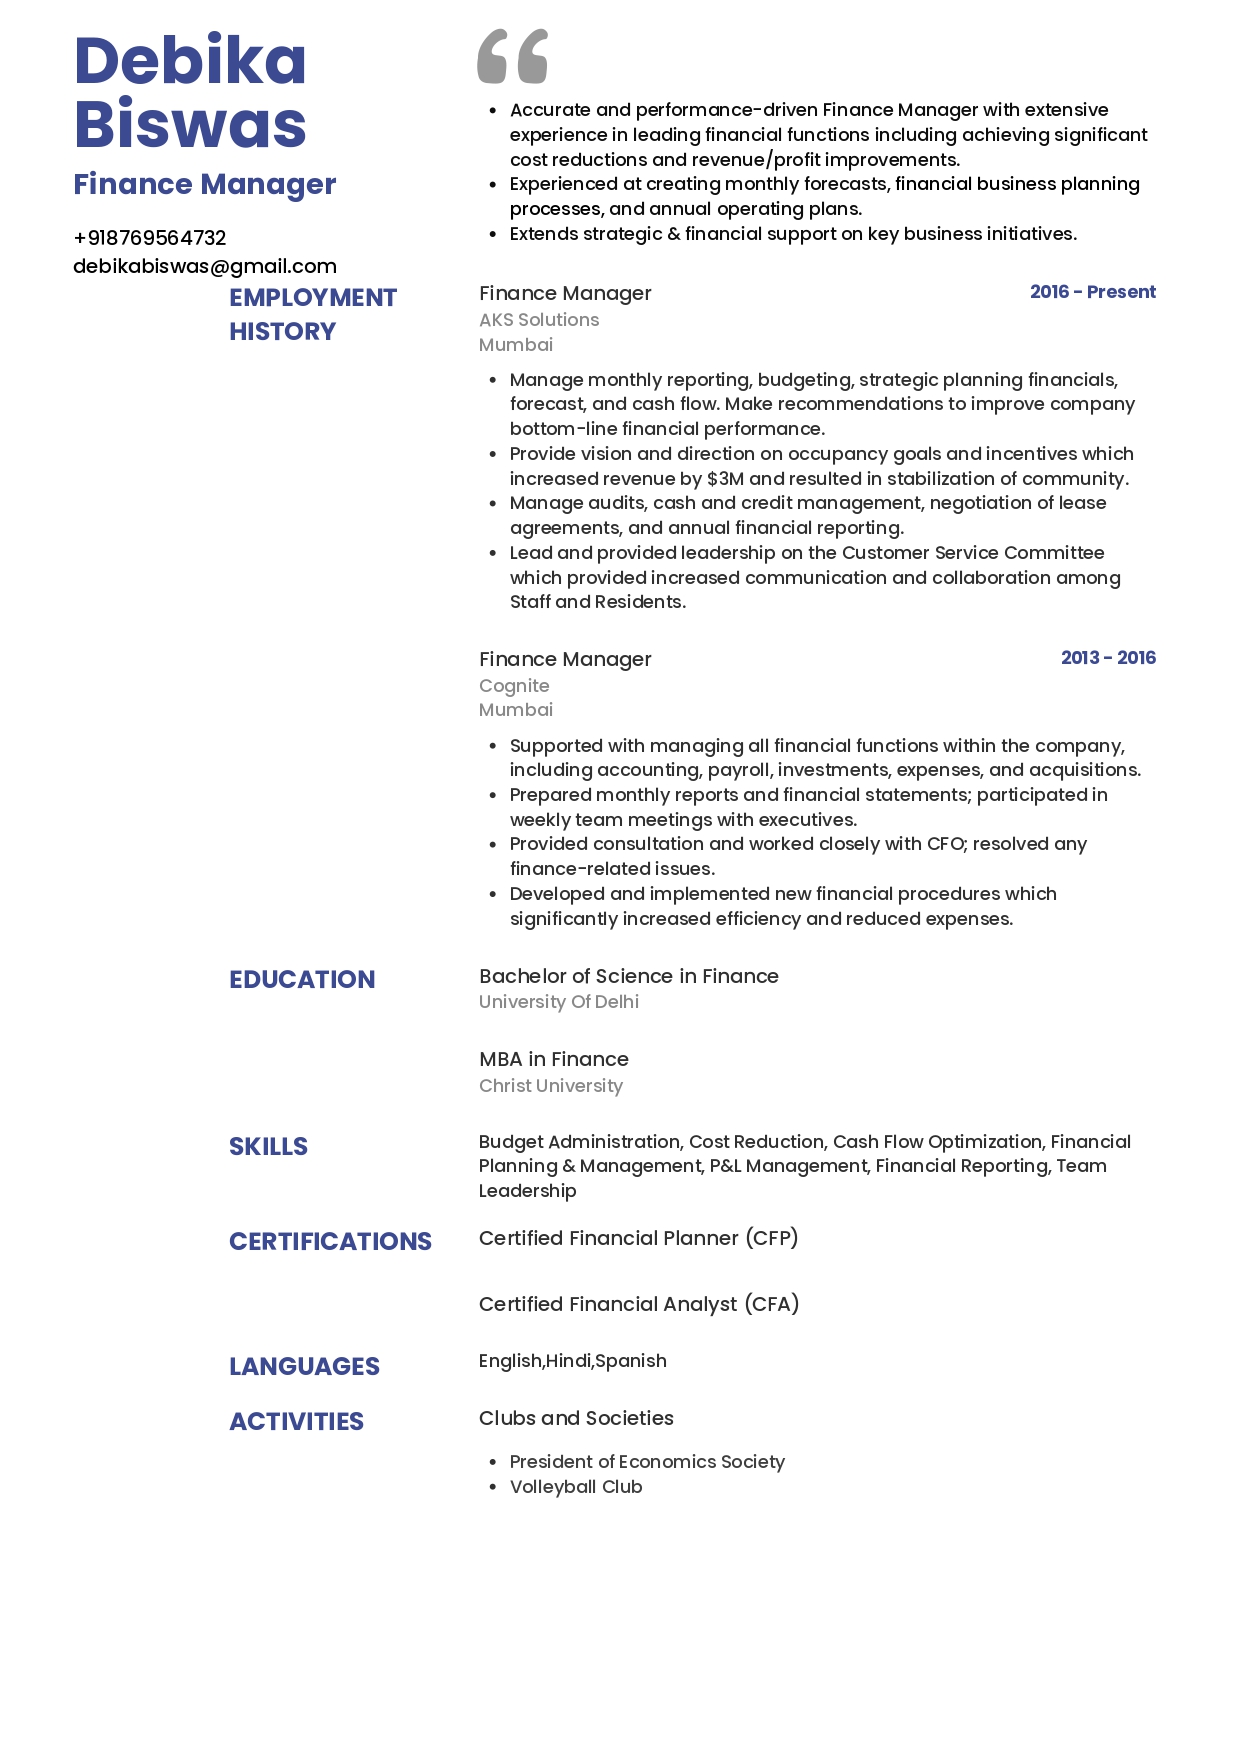 Sample Resume of Finance Manager | Free Resume Templates & Samples on Resumod.co